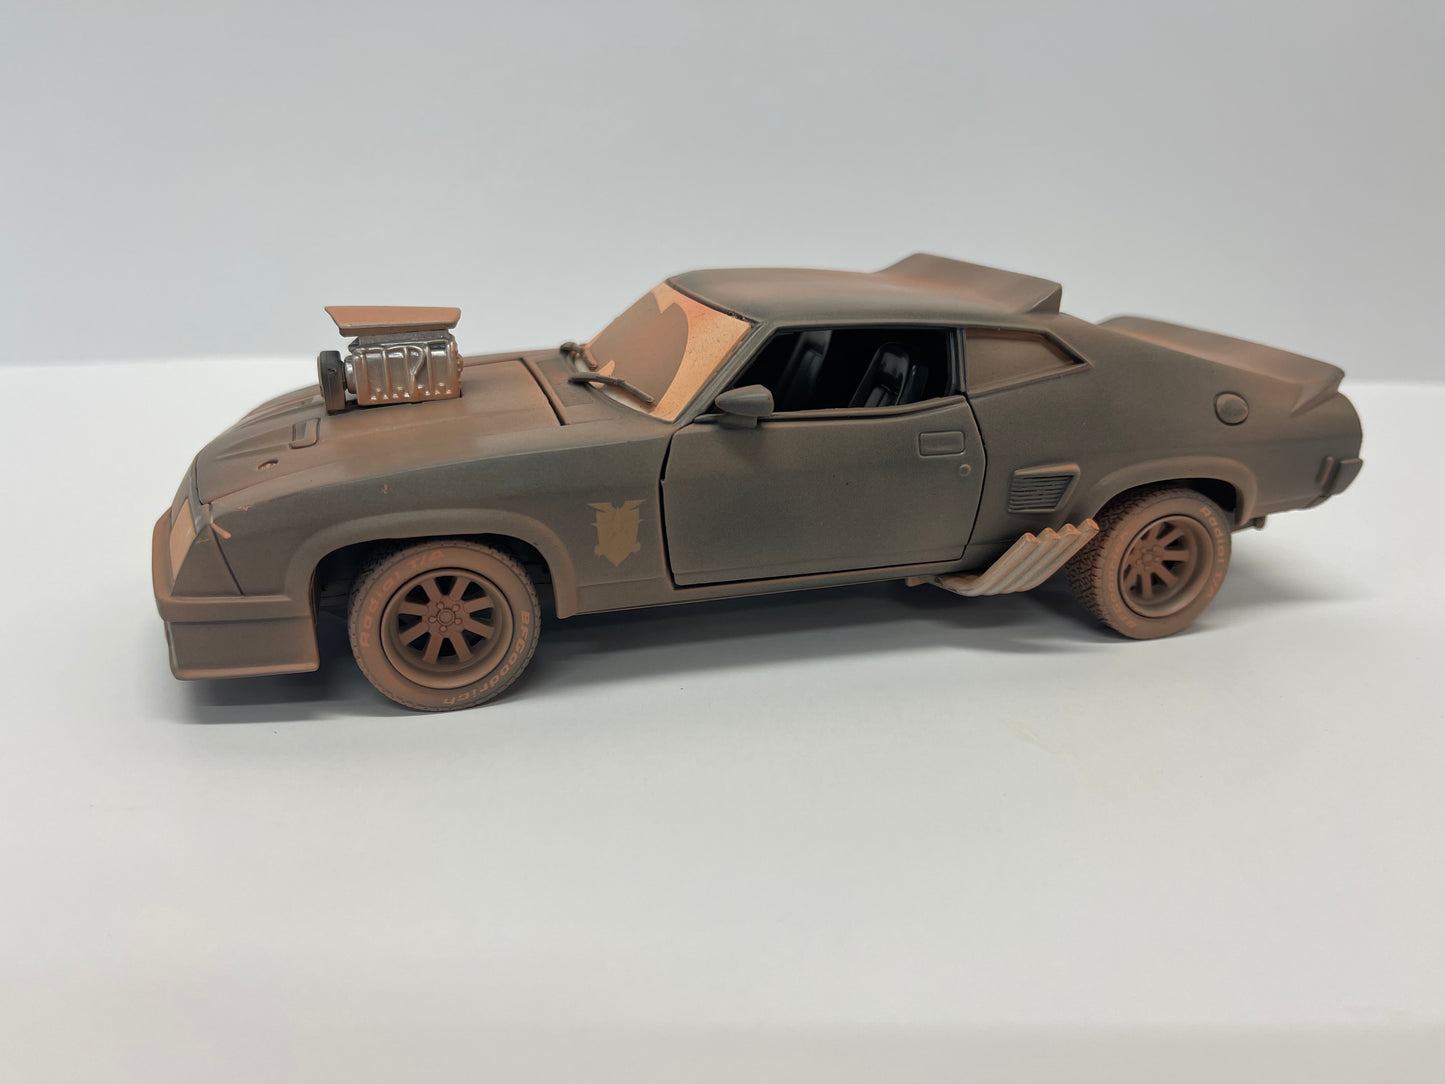 1973 Ford Falcon XB (Weathered Version) "Last of the V8 Interceptors" (1979) Movie 1/24 Diecast Model Car by Greenlight